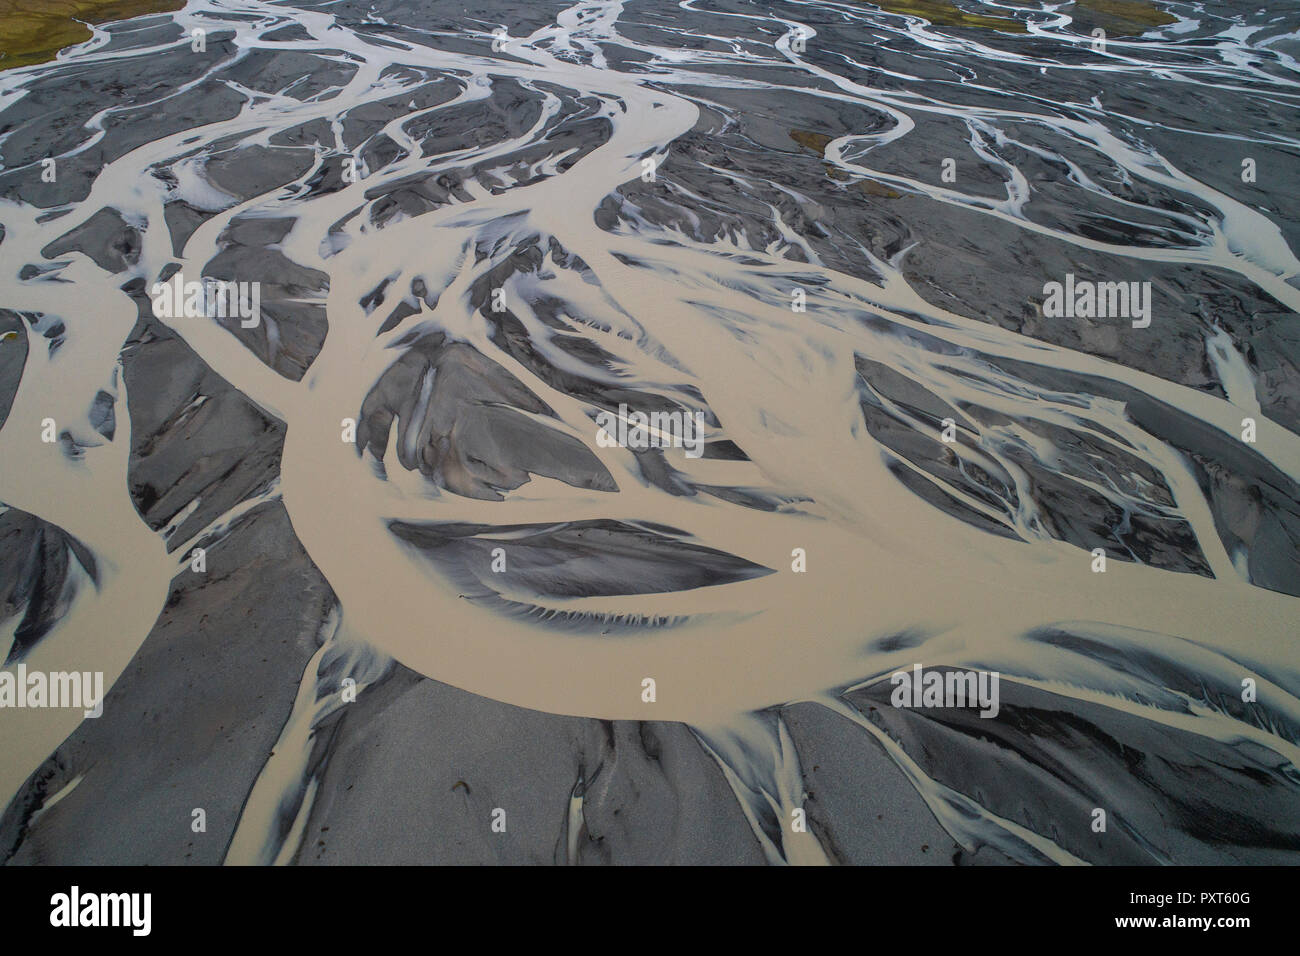 Meandering river in volcanic landscape, along road F35, Austurland, Iceland Stock Photo